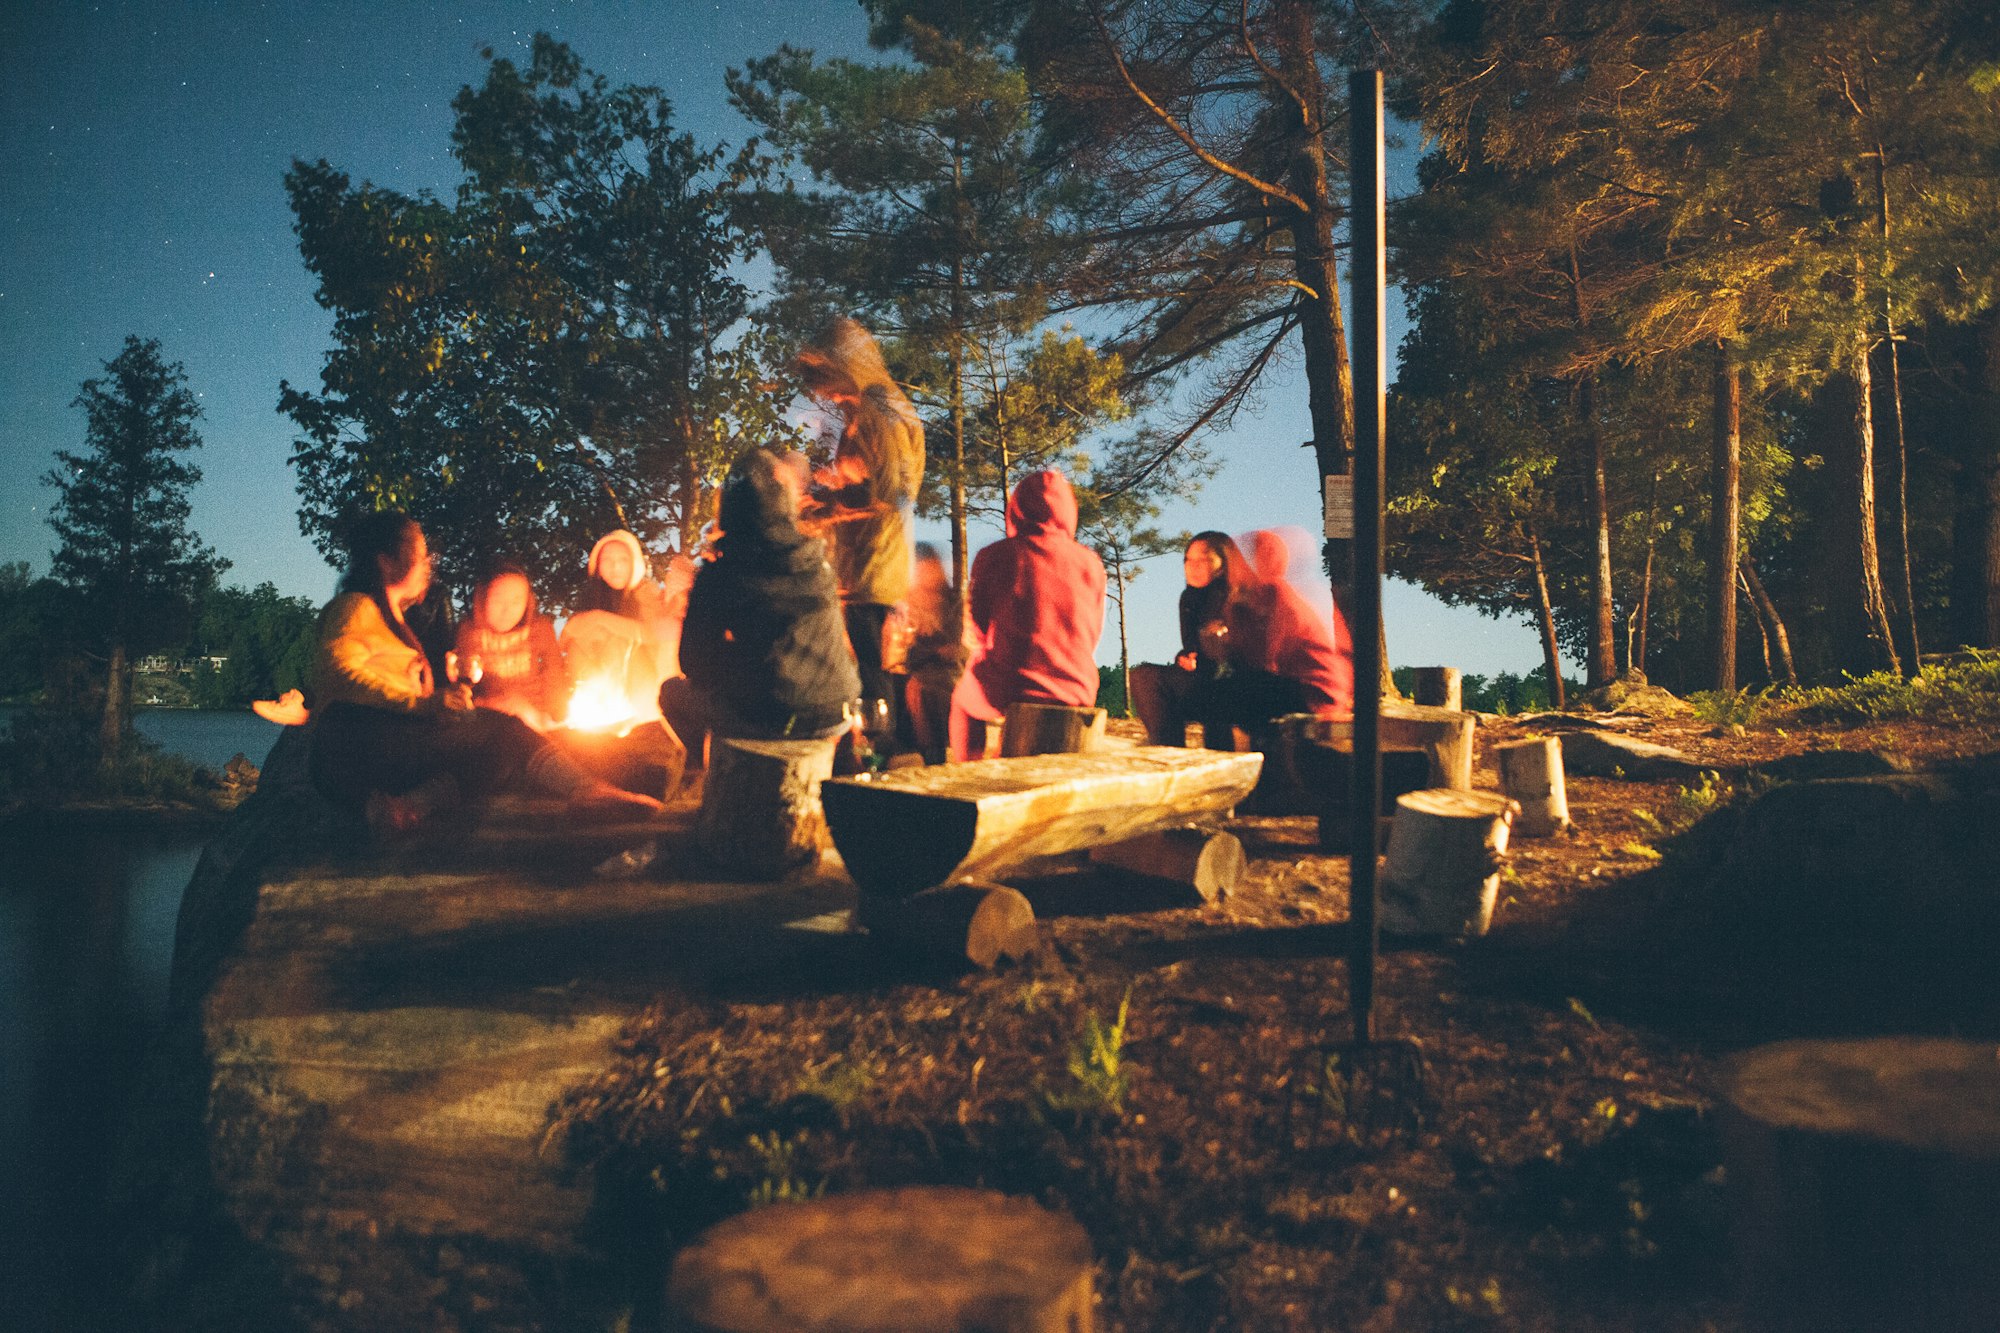 People sitting around a campfire in the wild